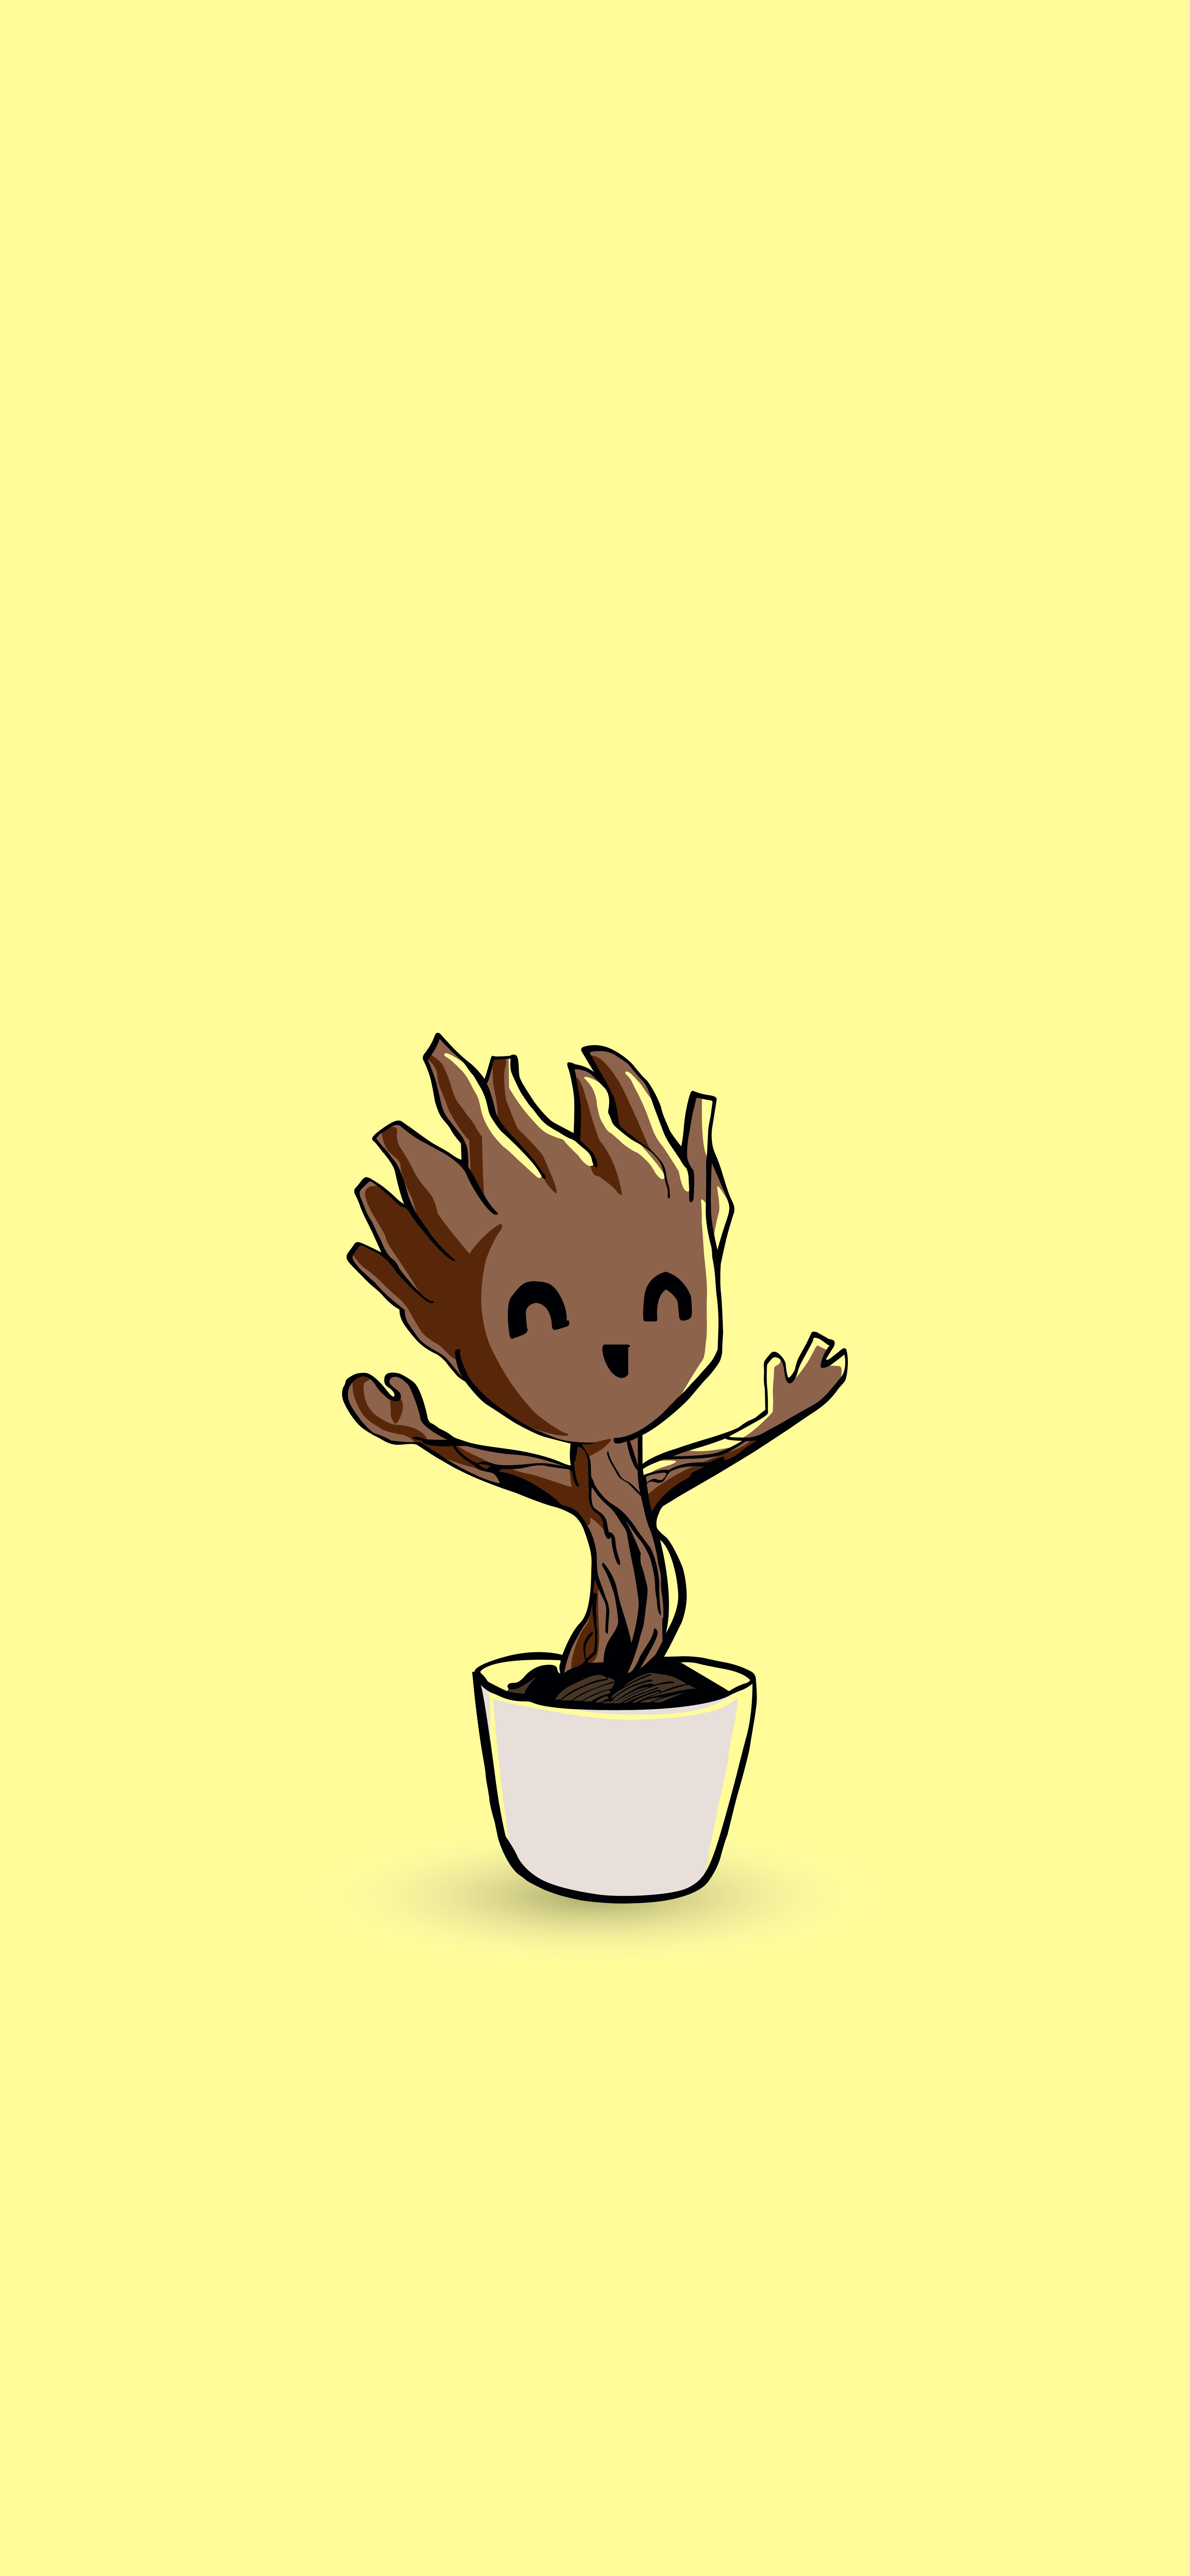 Baby Groot Ultra HD 4k Wallpaper for iPhone X